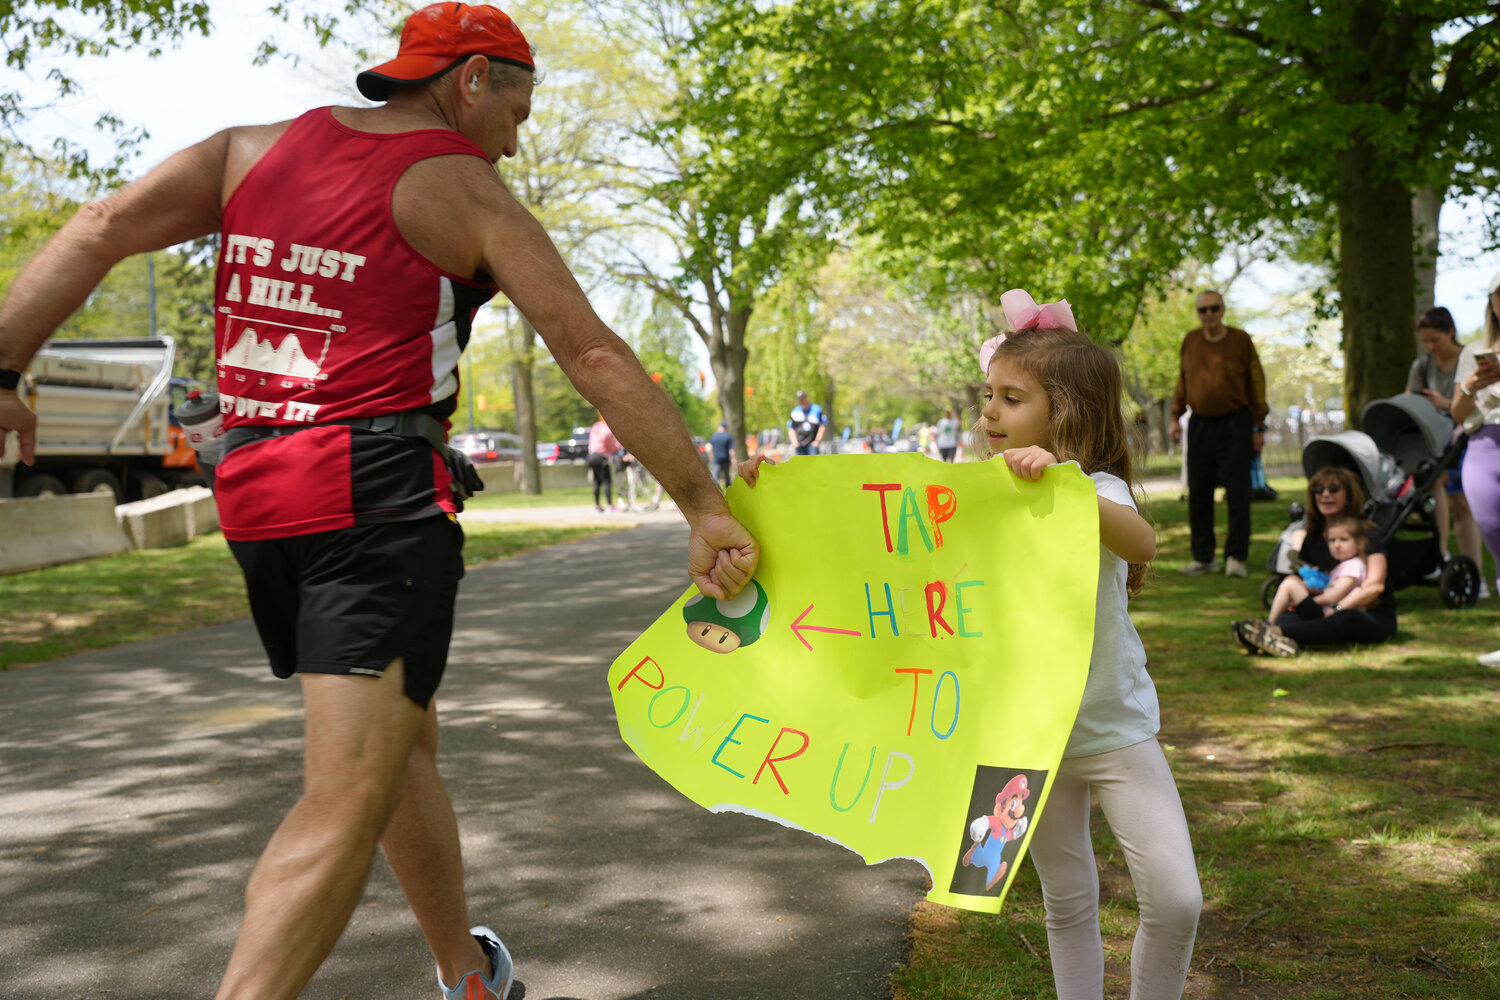 Harper Gregory, 5, of East Meadow, had a sign ready for marathoners who wanted an extra boost.